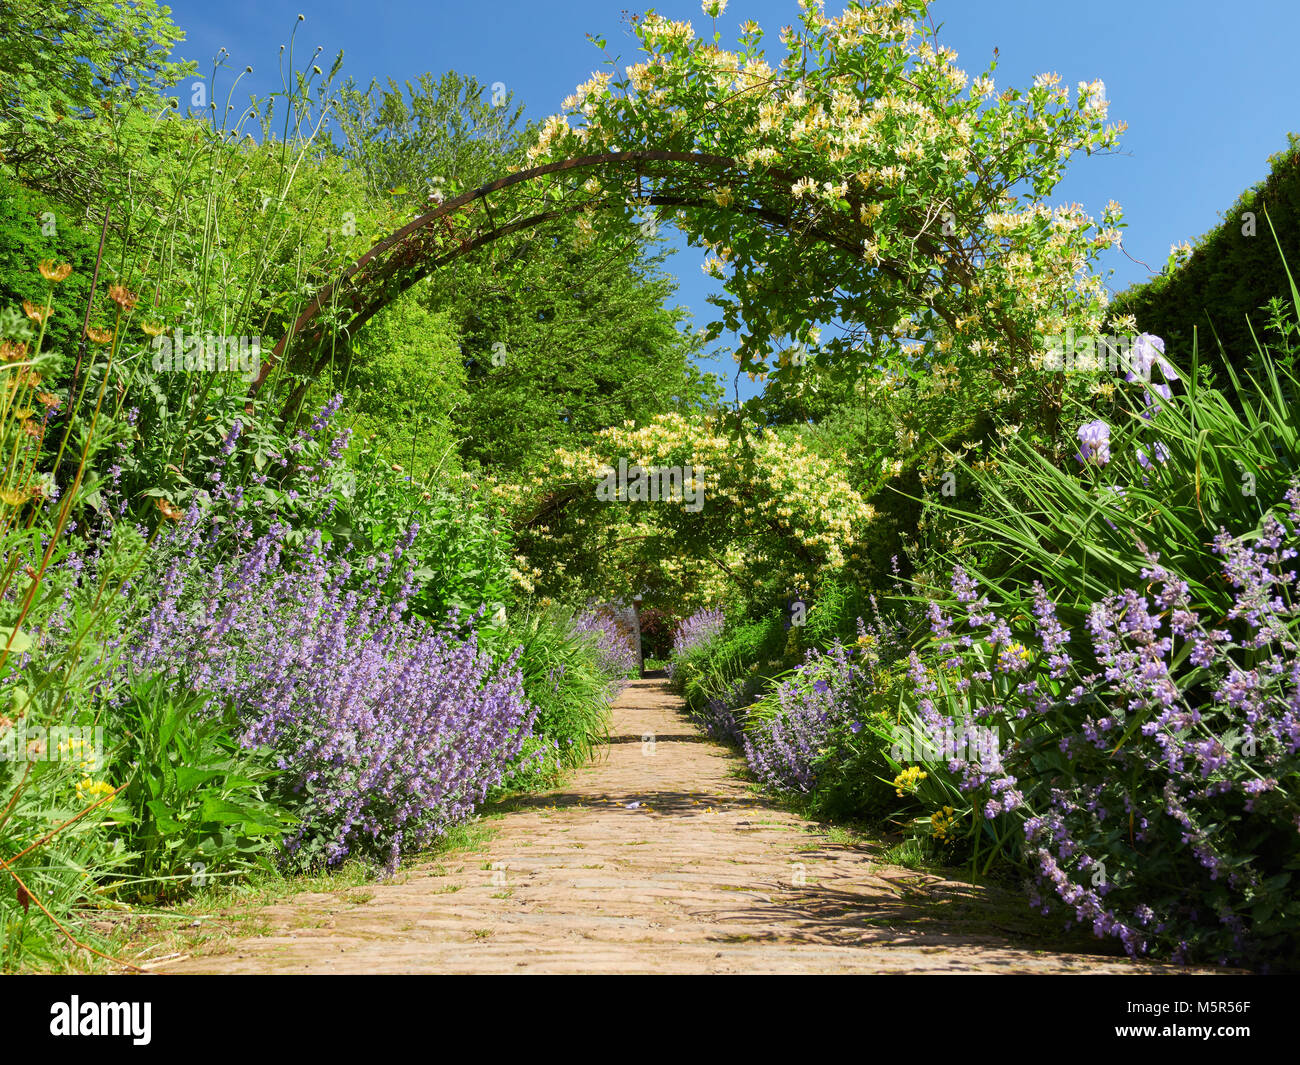 Honeysuckle arches over a garden path  on a sunny day in an English country Garden, UK. Stock Photo